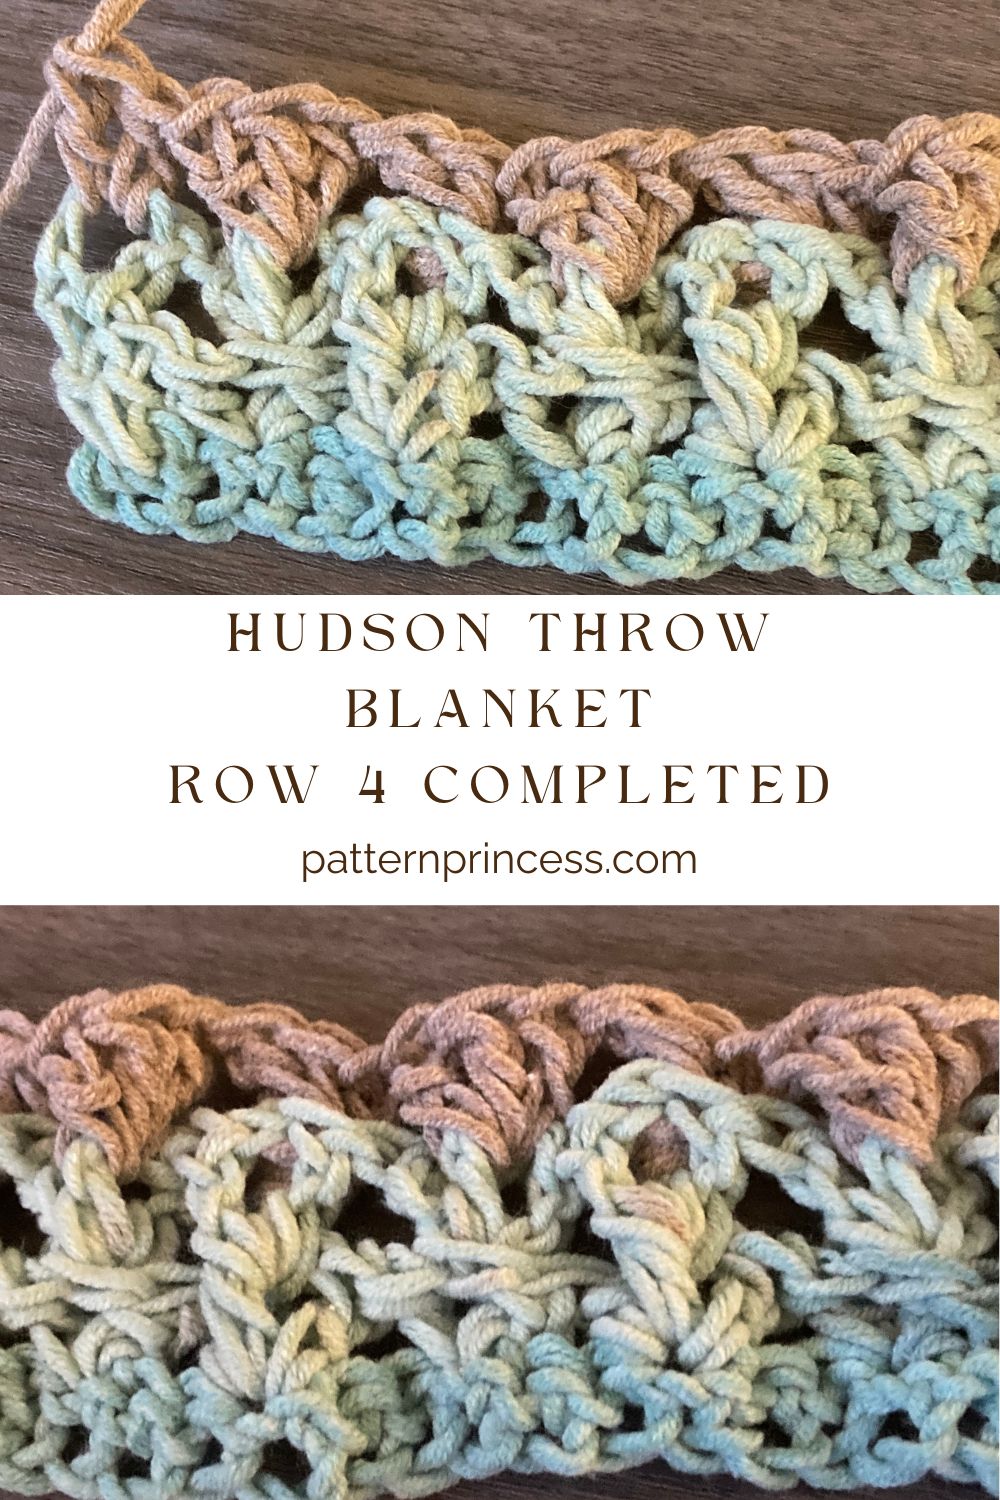 Hudson Throw Blanket row 4 completed